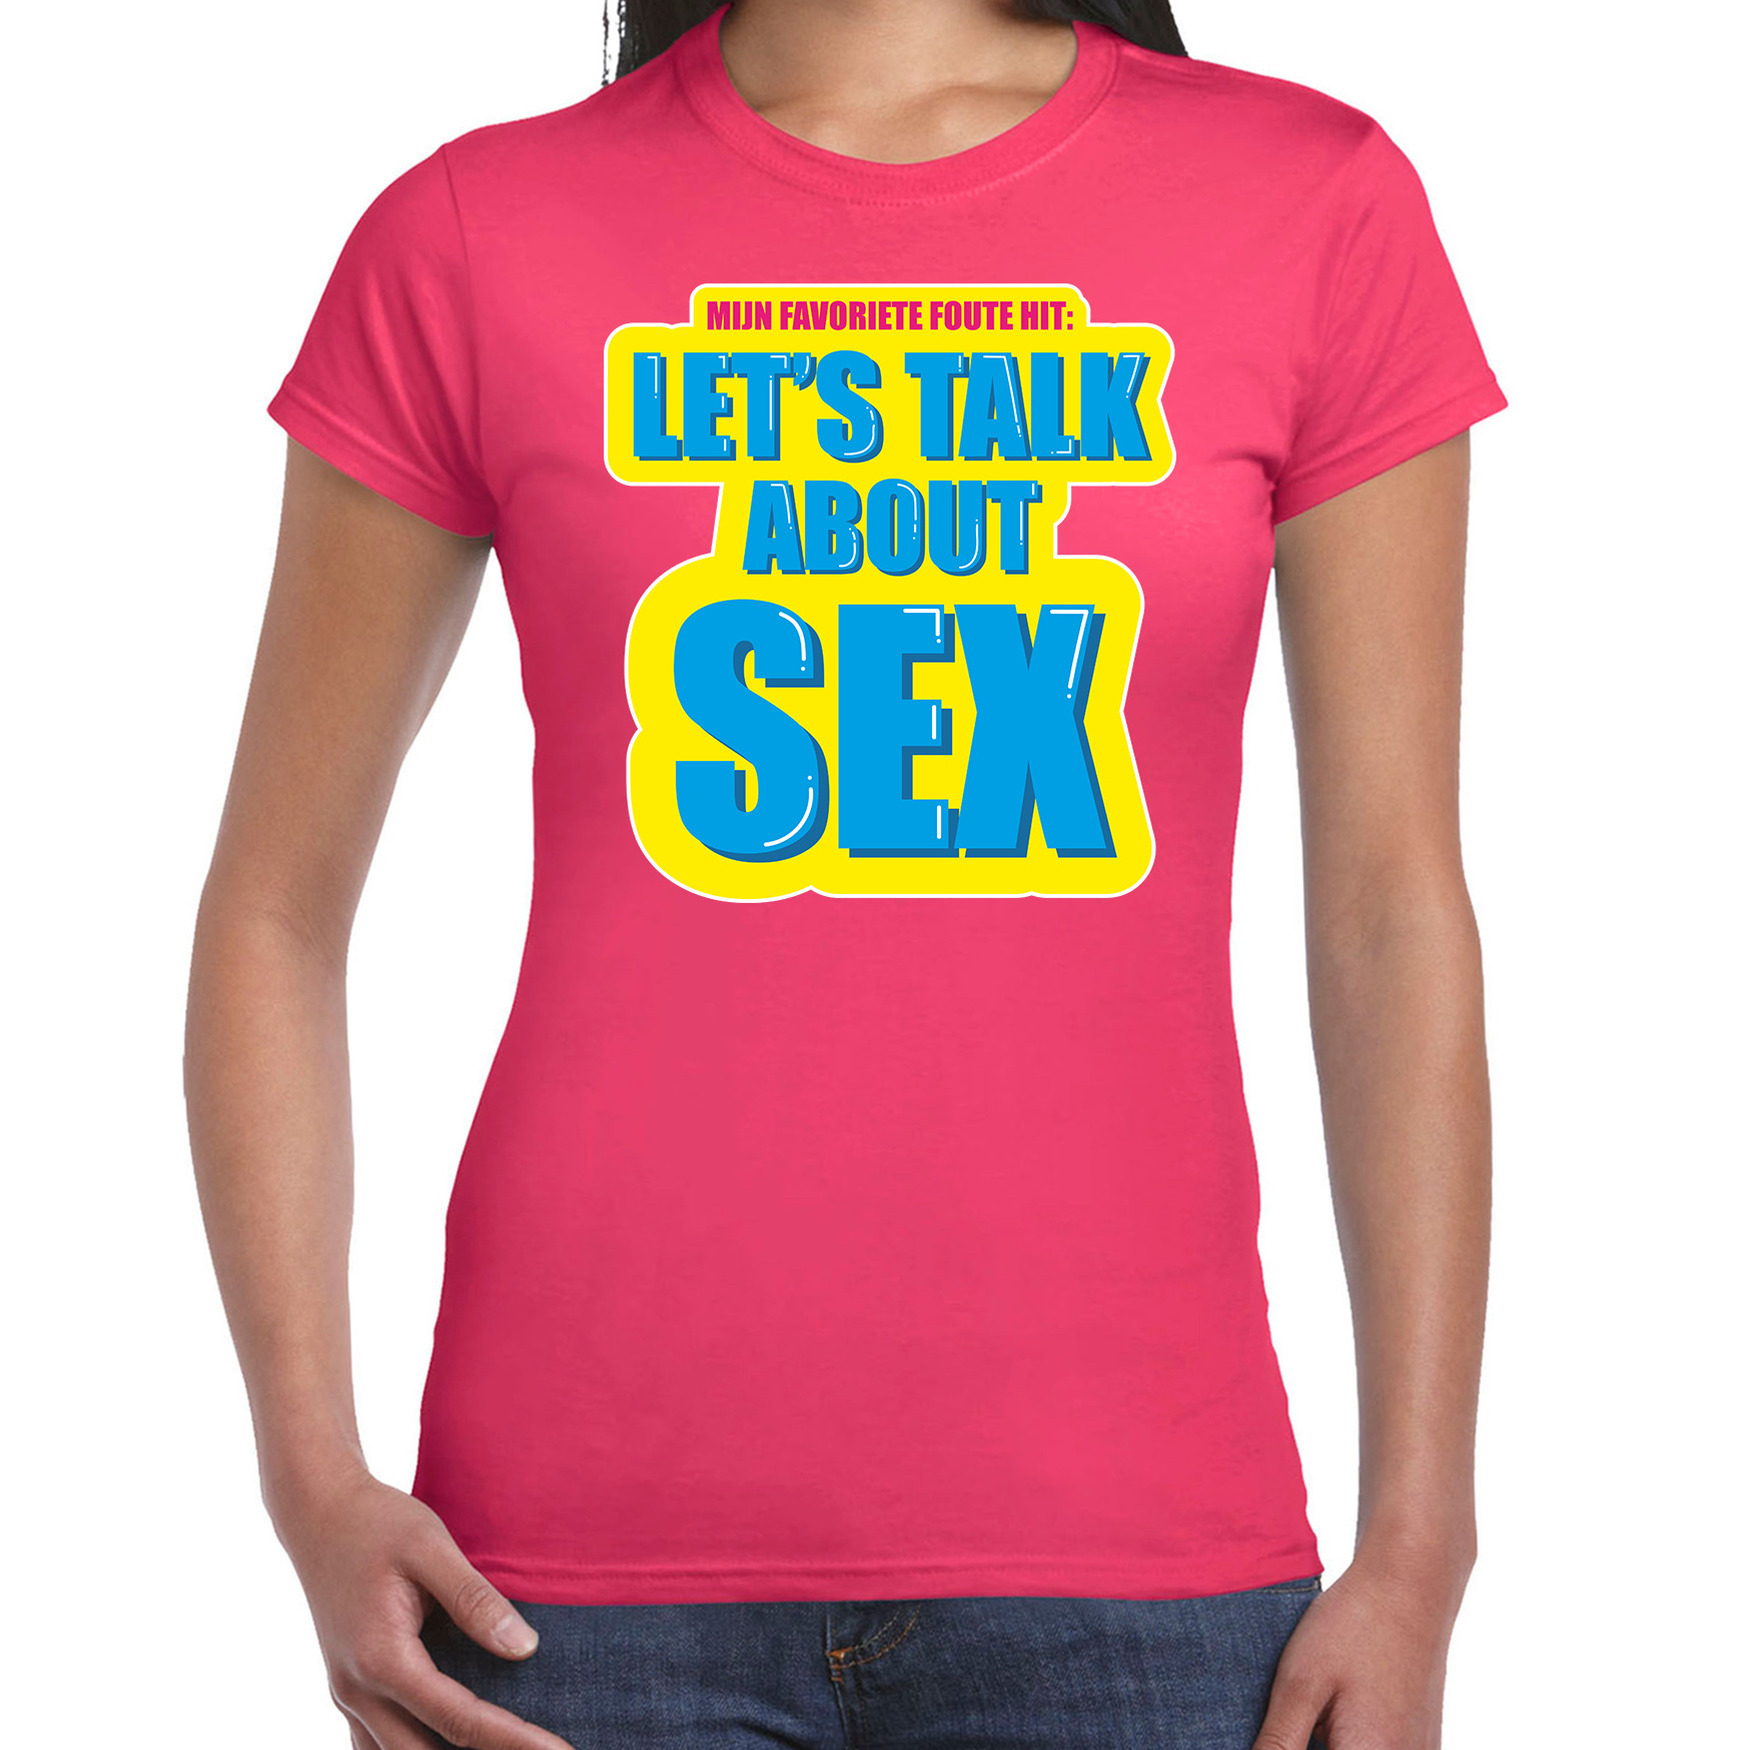 Foute party Let s talk about sex verkleed t-shirt roze dames - Foute party hits outfit/ kleding